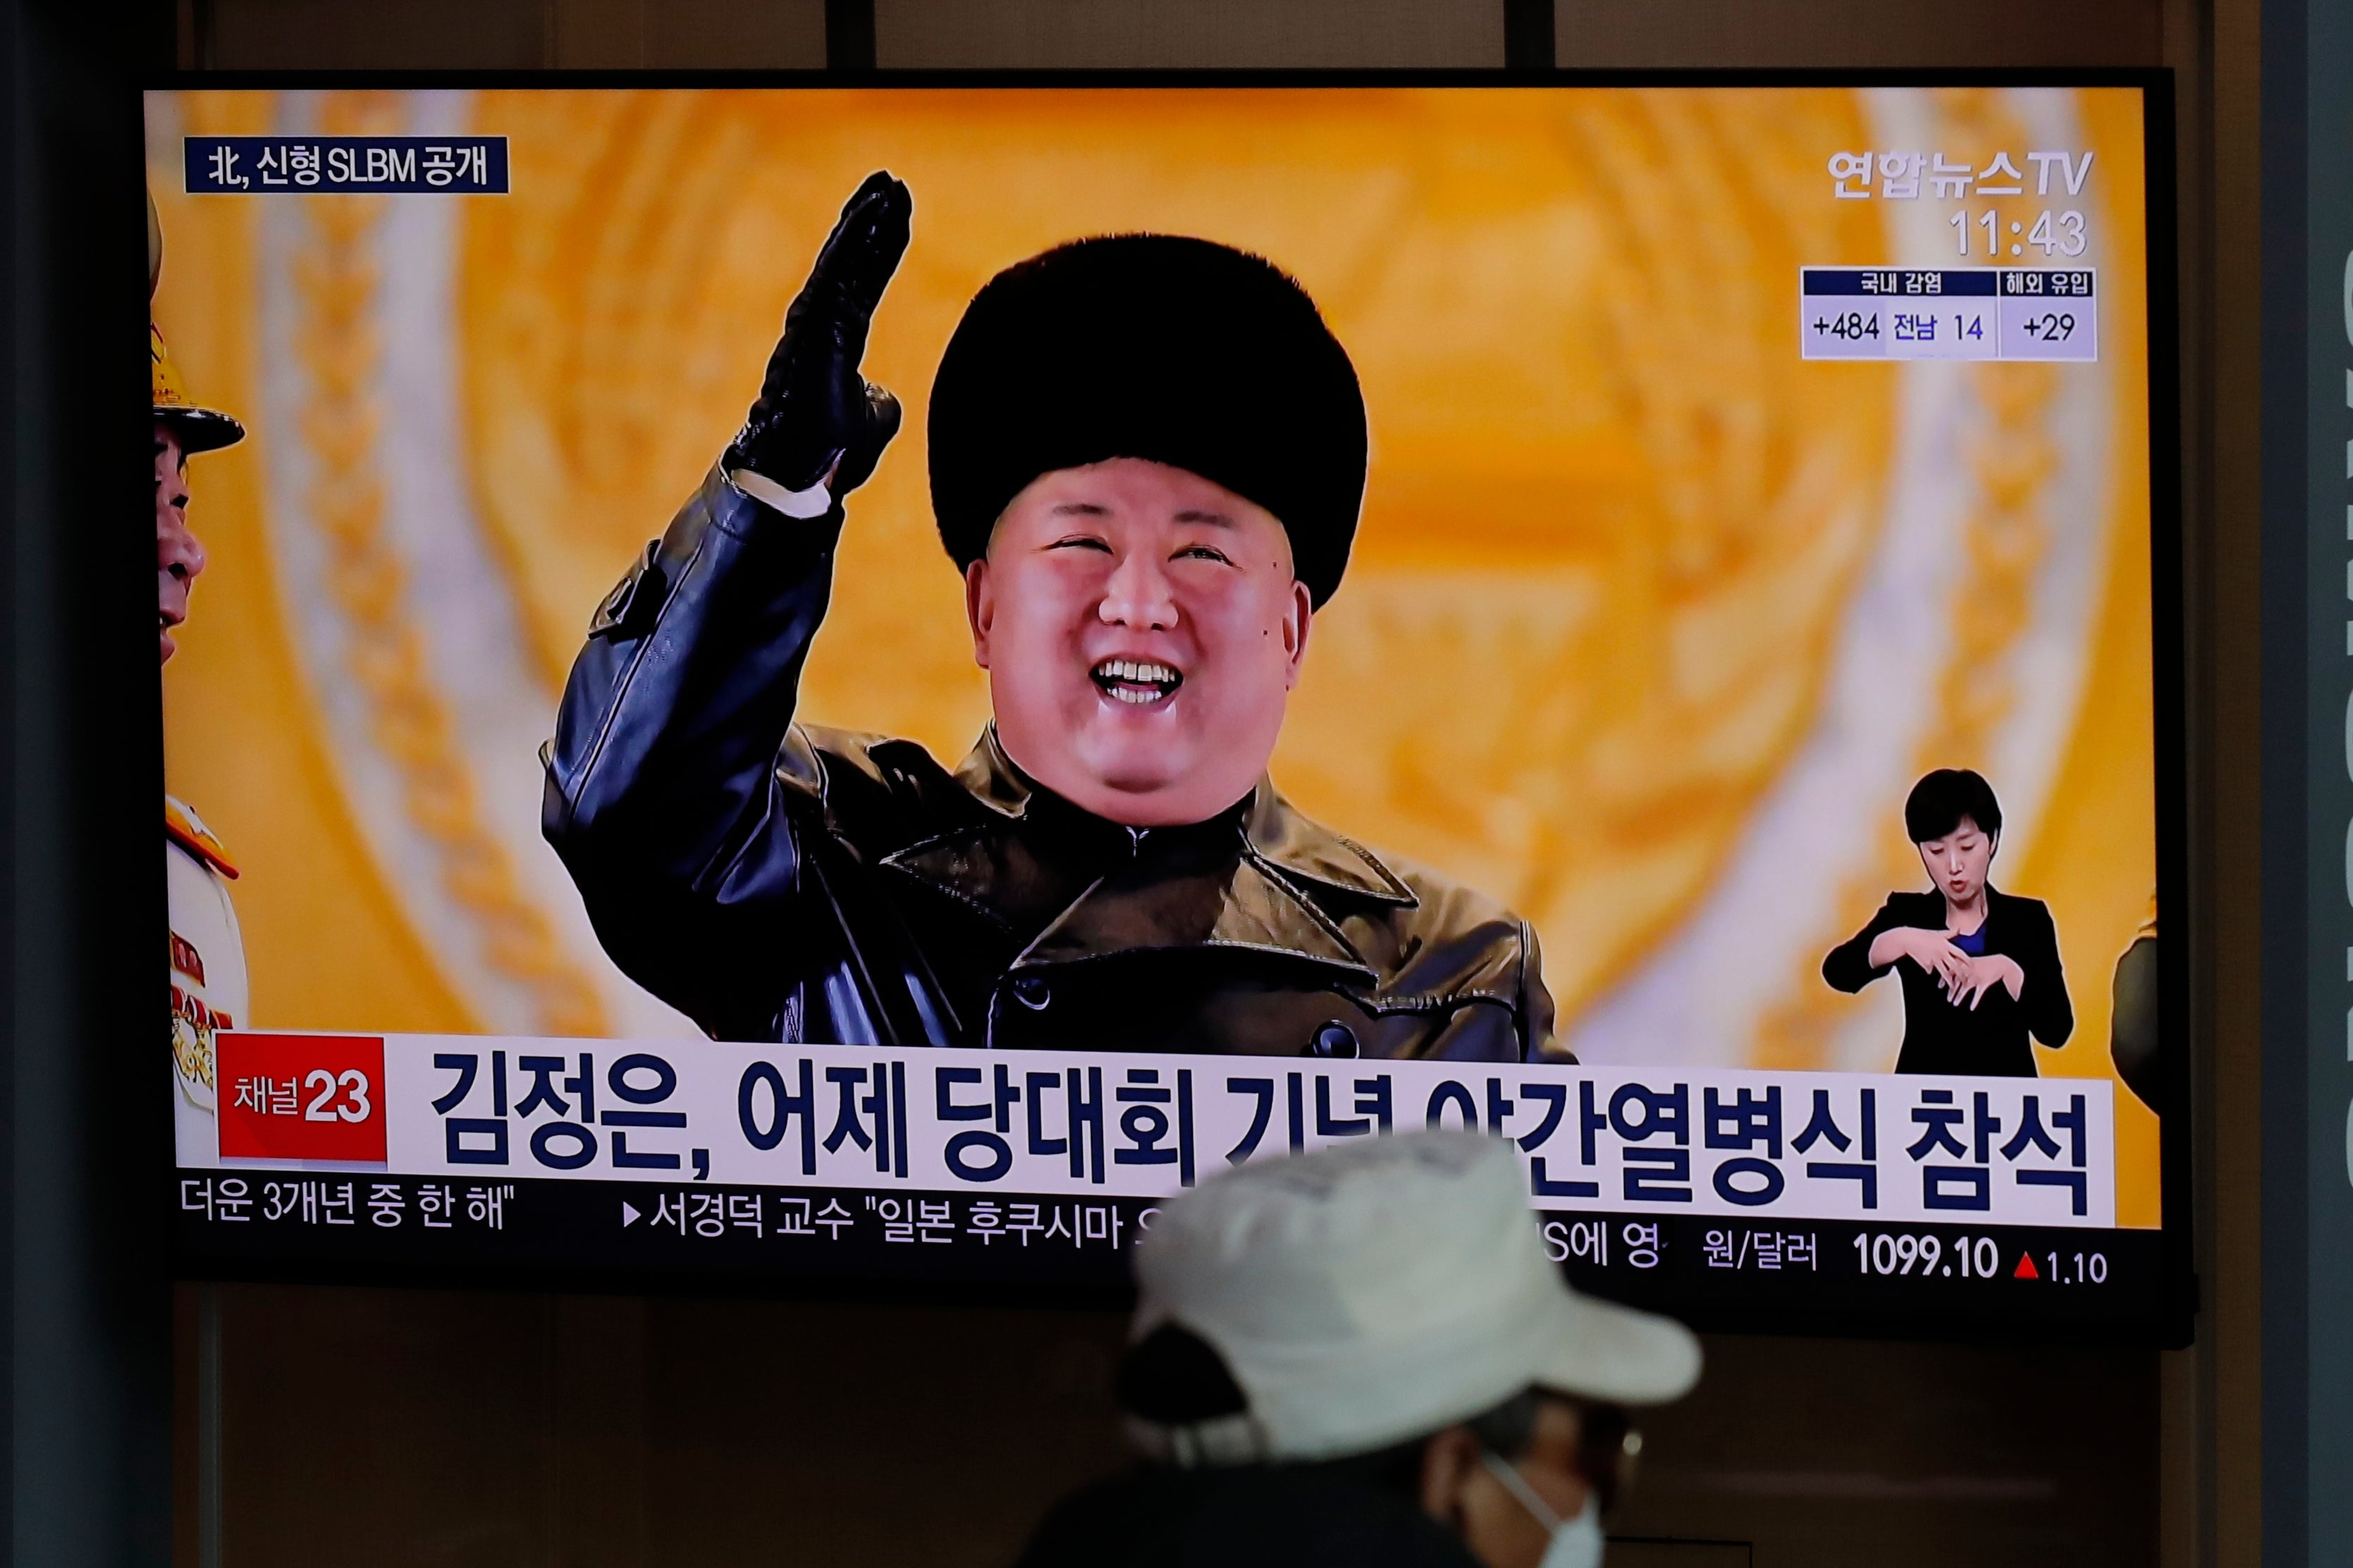 North Korea recently had a rare party congress where Kim Jong-un talked about bolstering his country’s ‘nuclear deterrent’